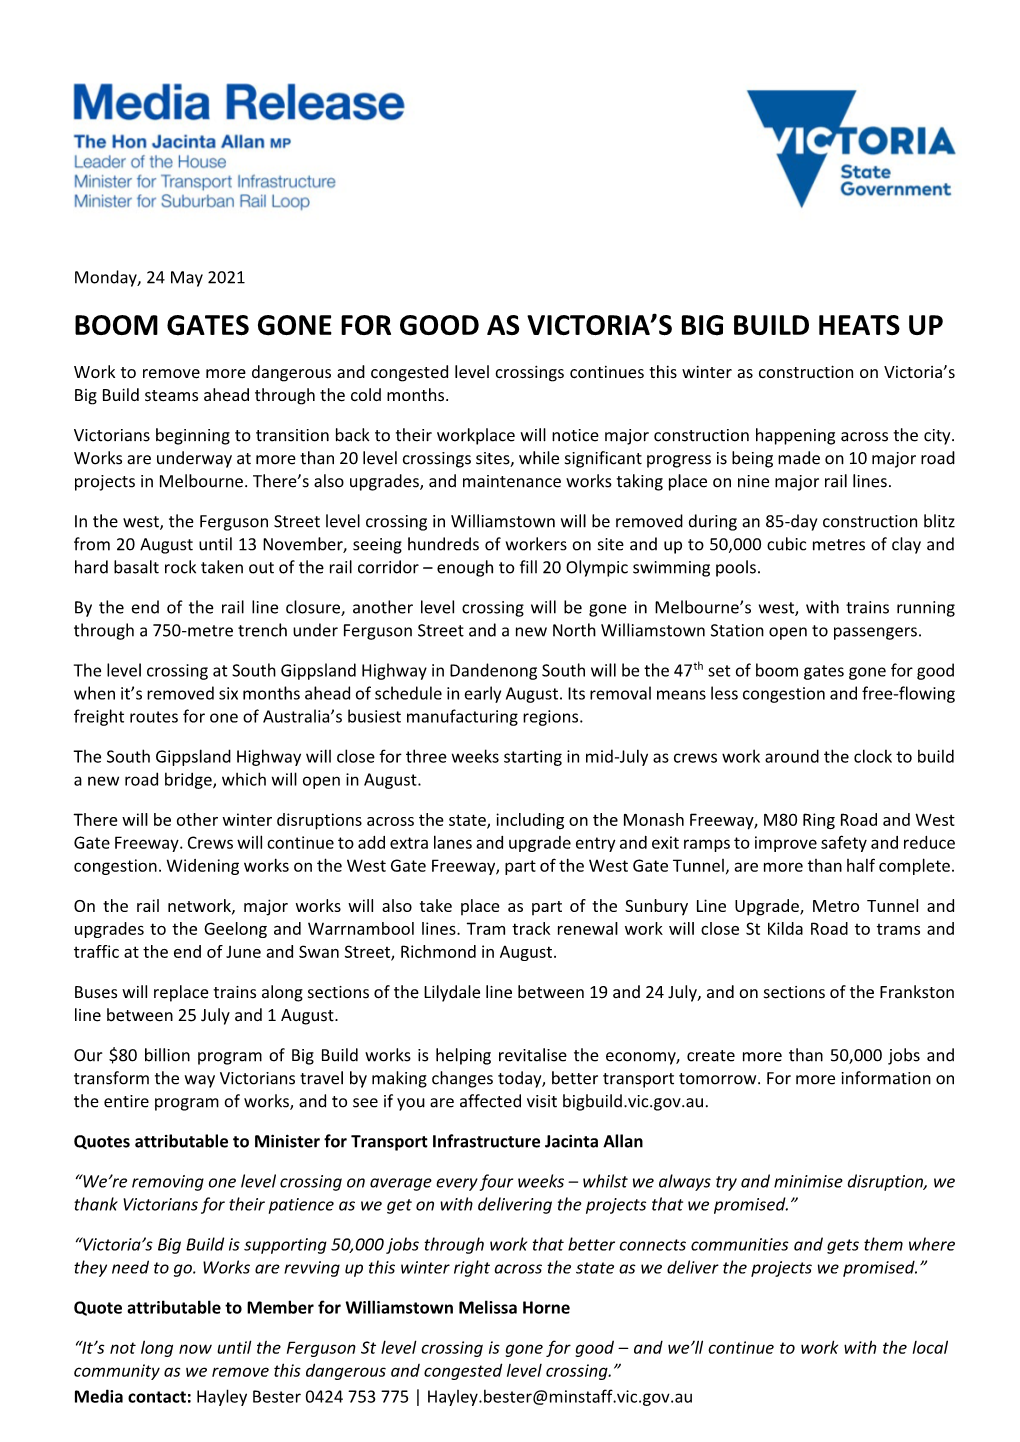 Boom Gates Gone for Good As Victoria's Big Build Heats Up